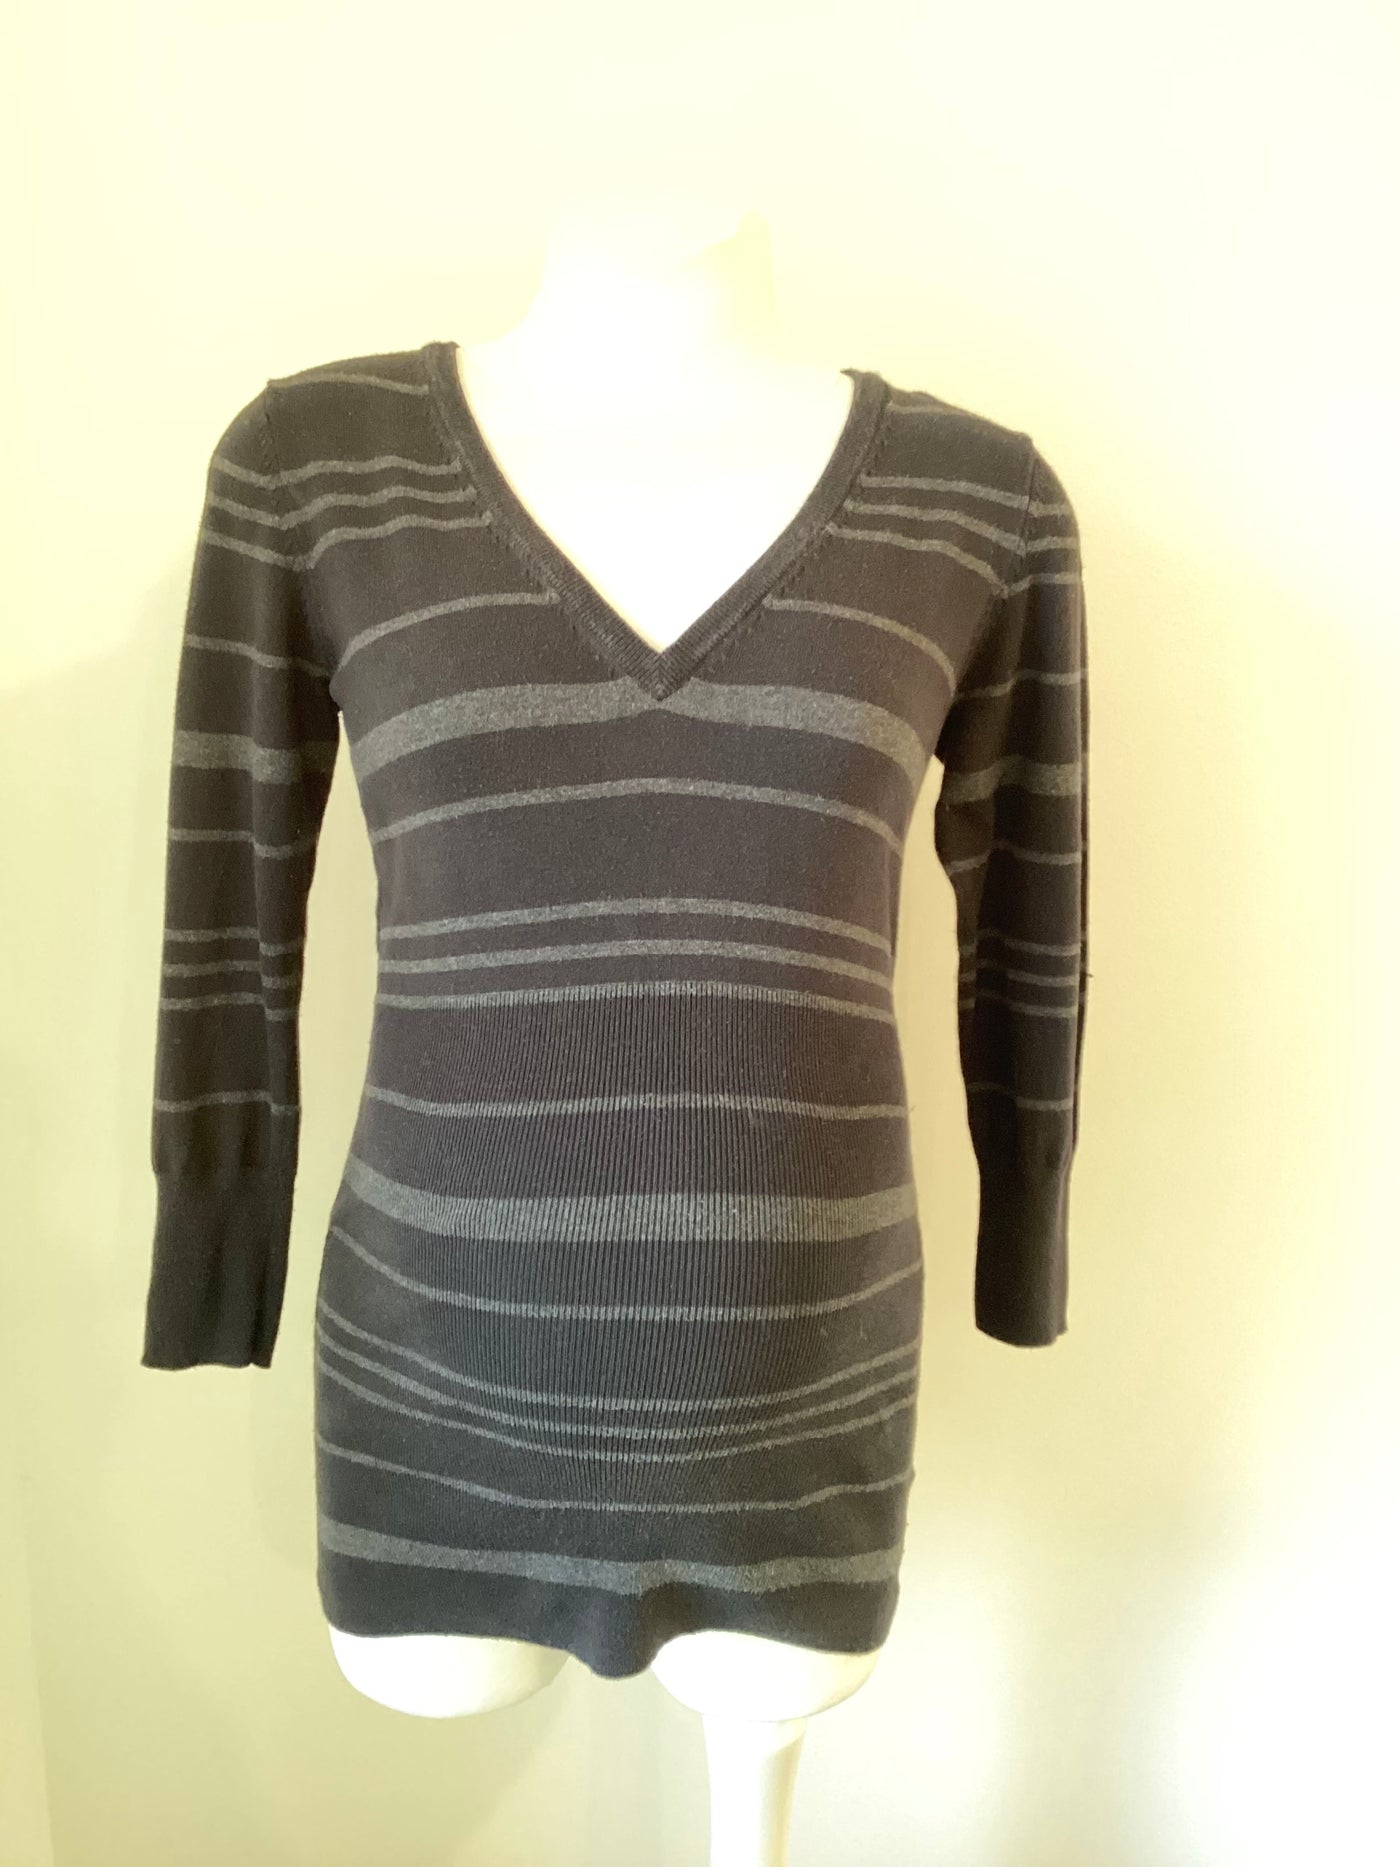 H&M Mama black & grey stripe stretch knit jumper with 3/4 sleeves - Size M (approx UK 10/12)